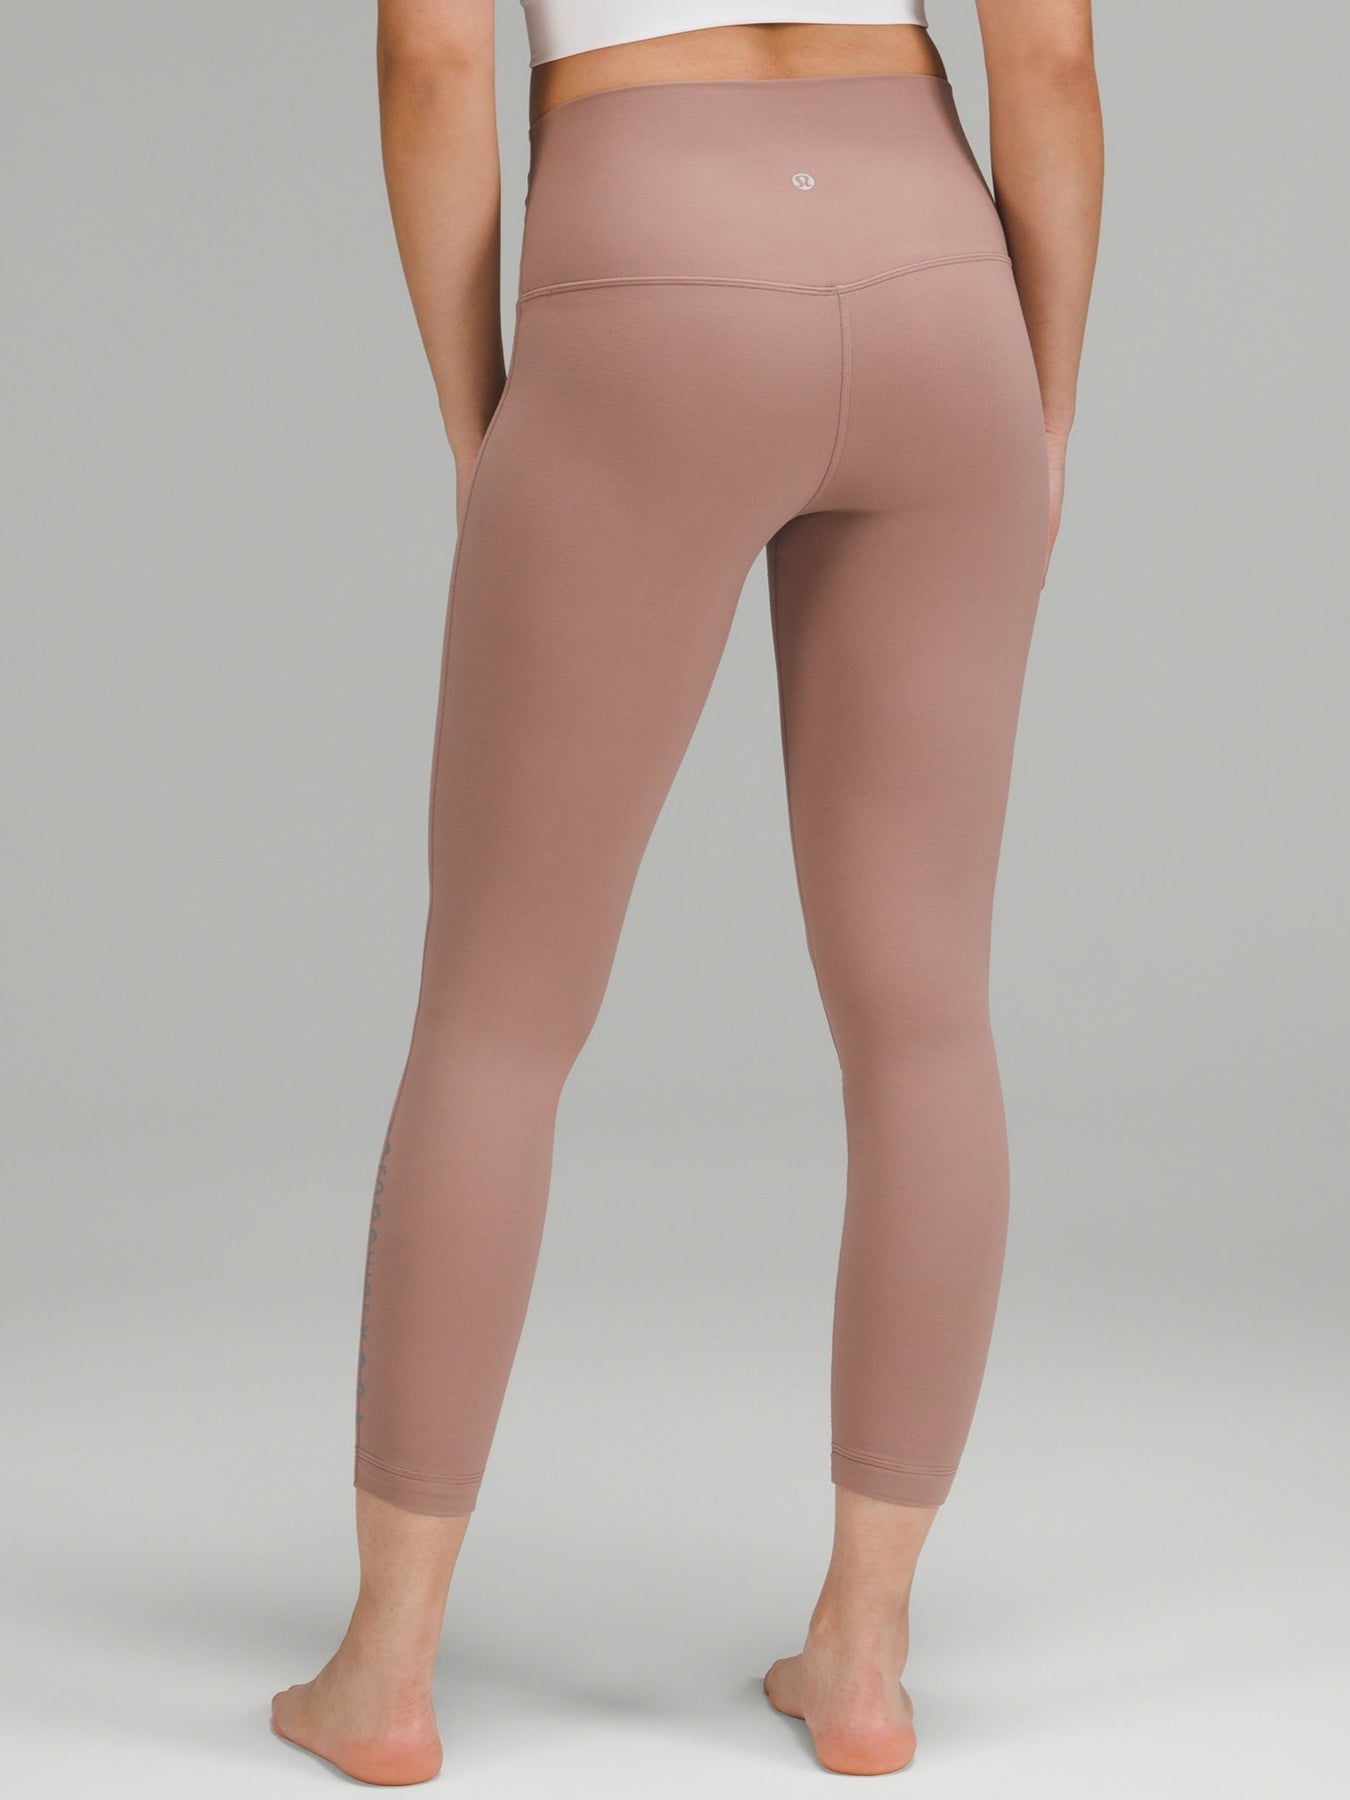 Comparing twilight rose and dark oxide from @lululemon which neutral t